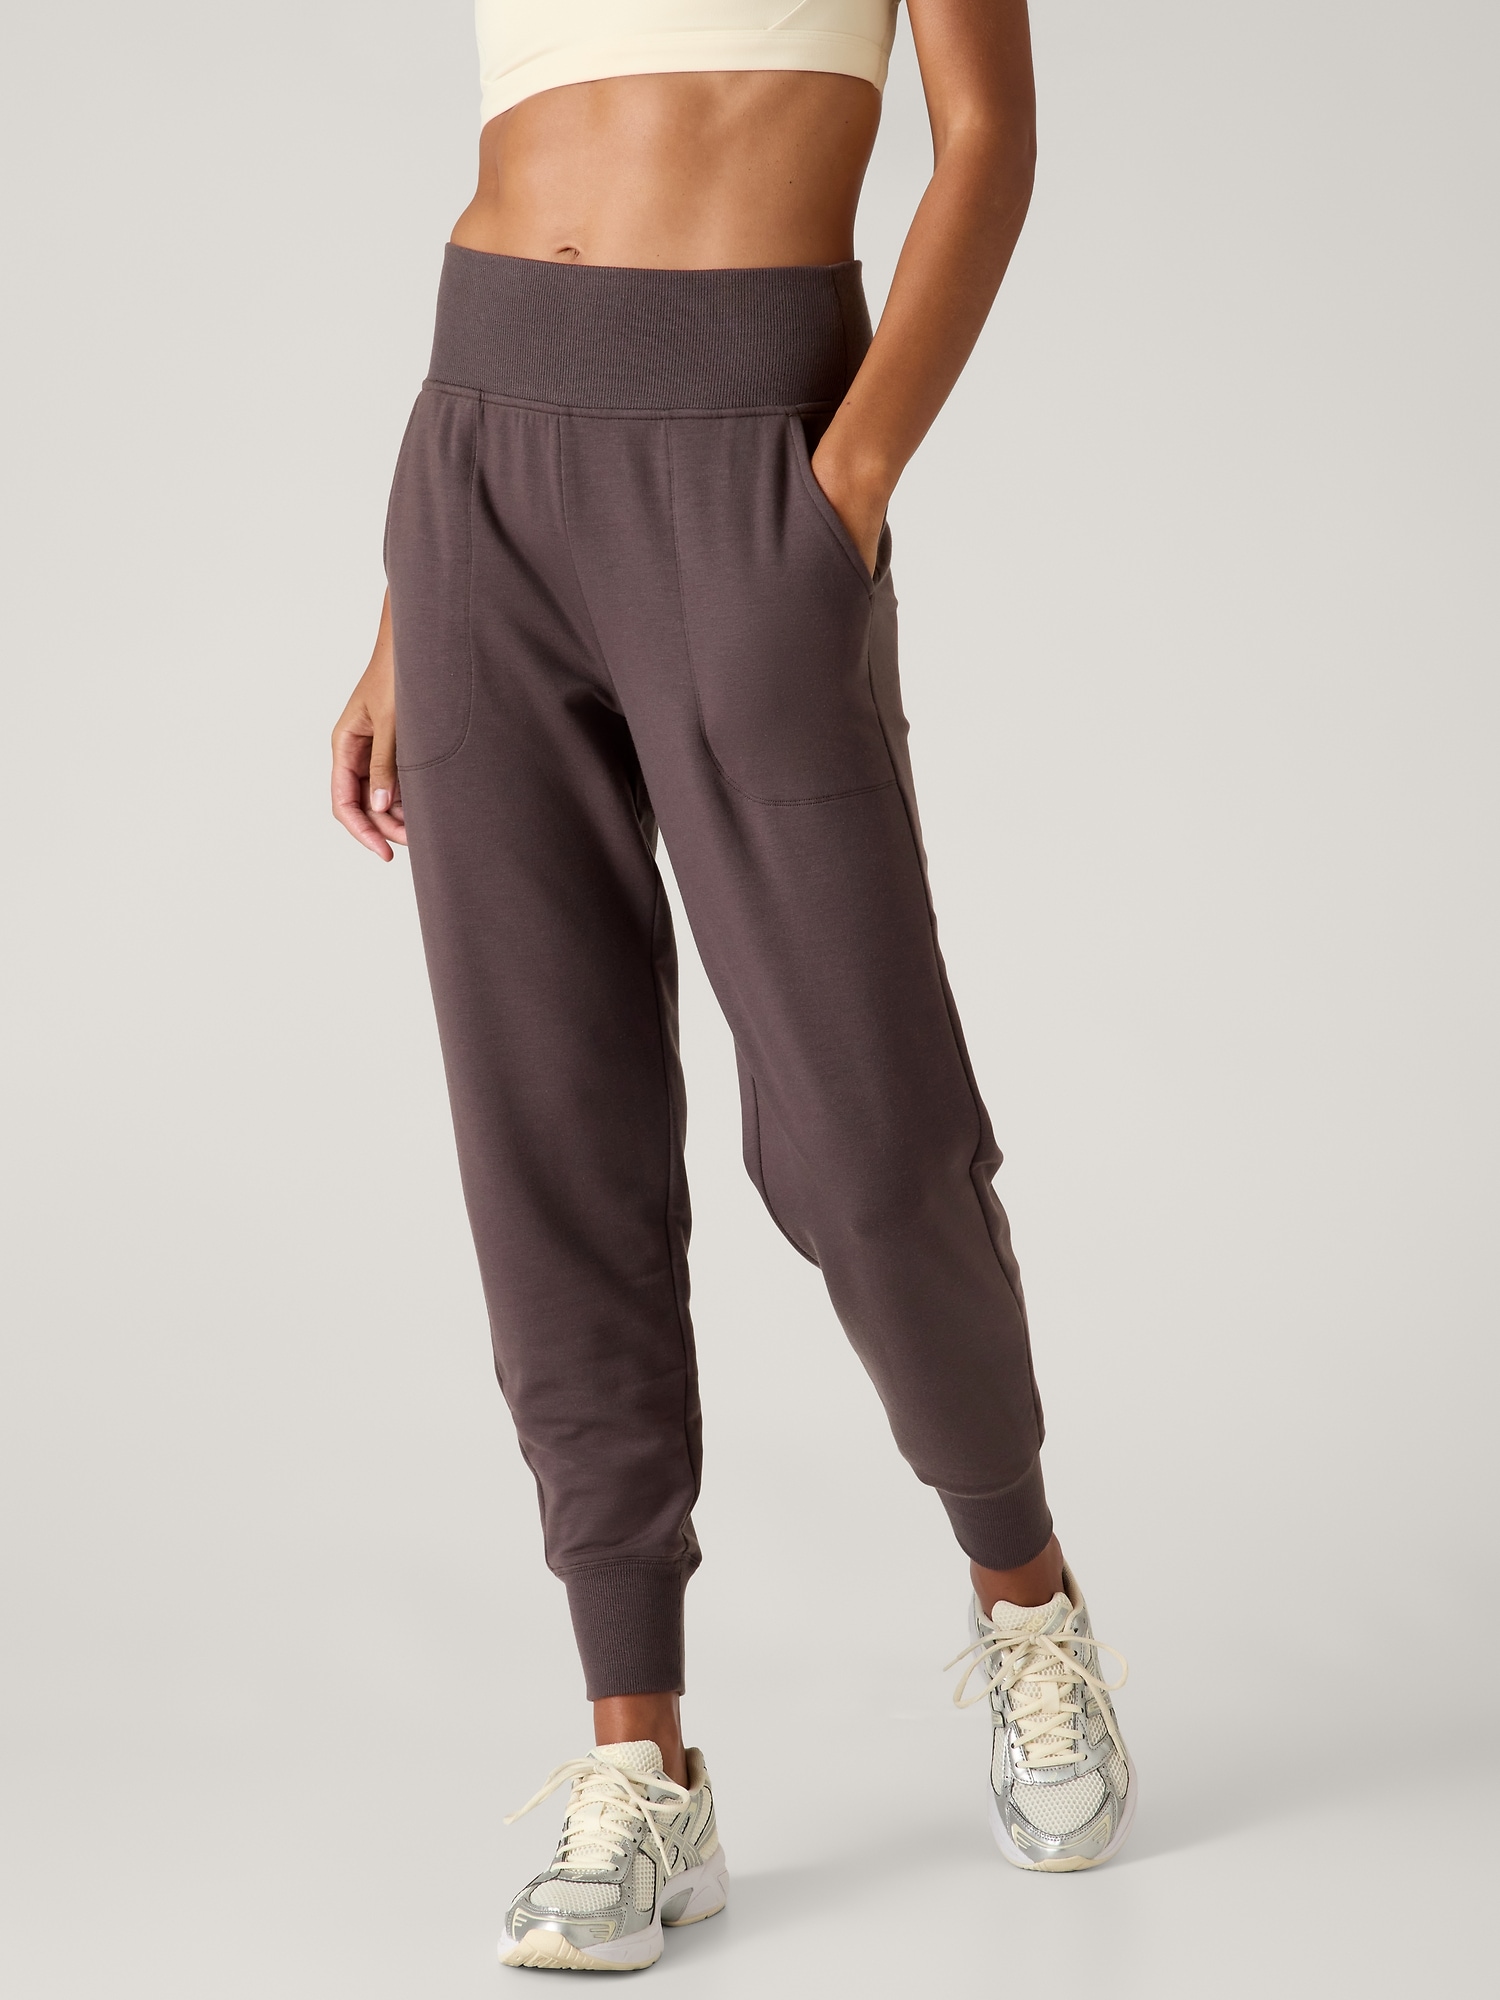 Athleta Coaster Luxe Jogger In Shale